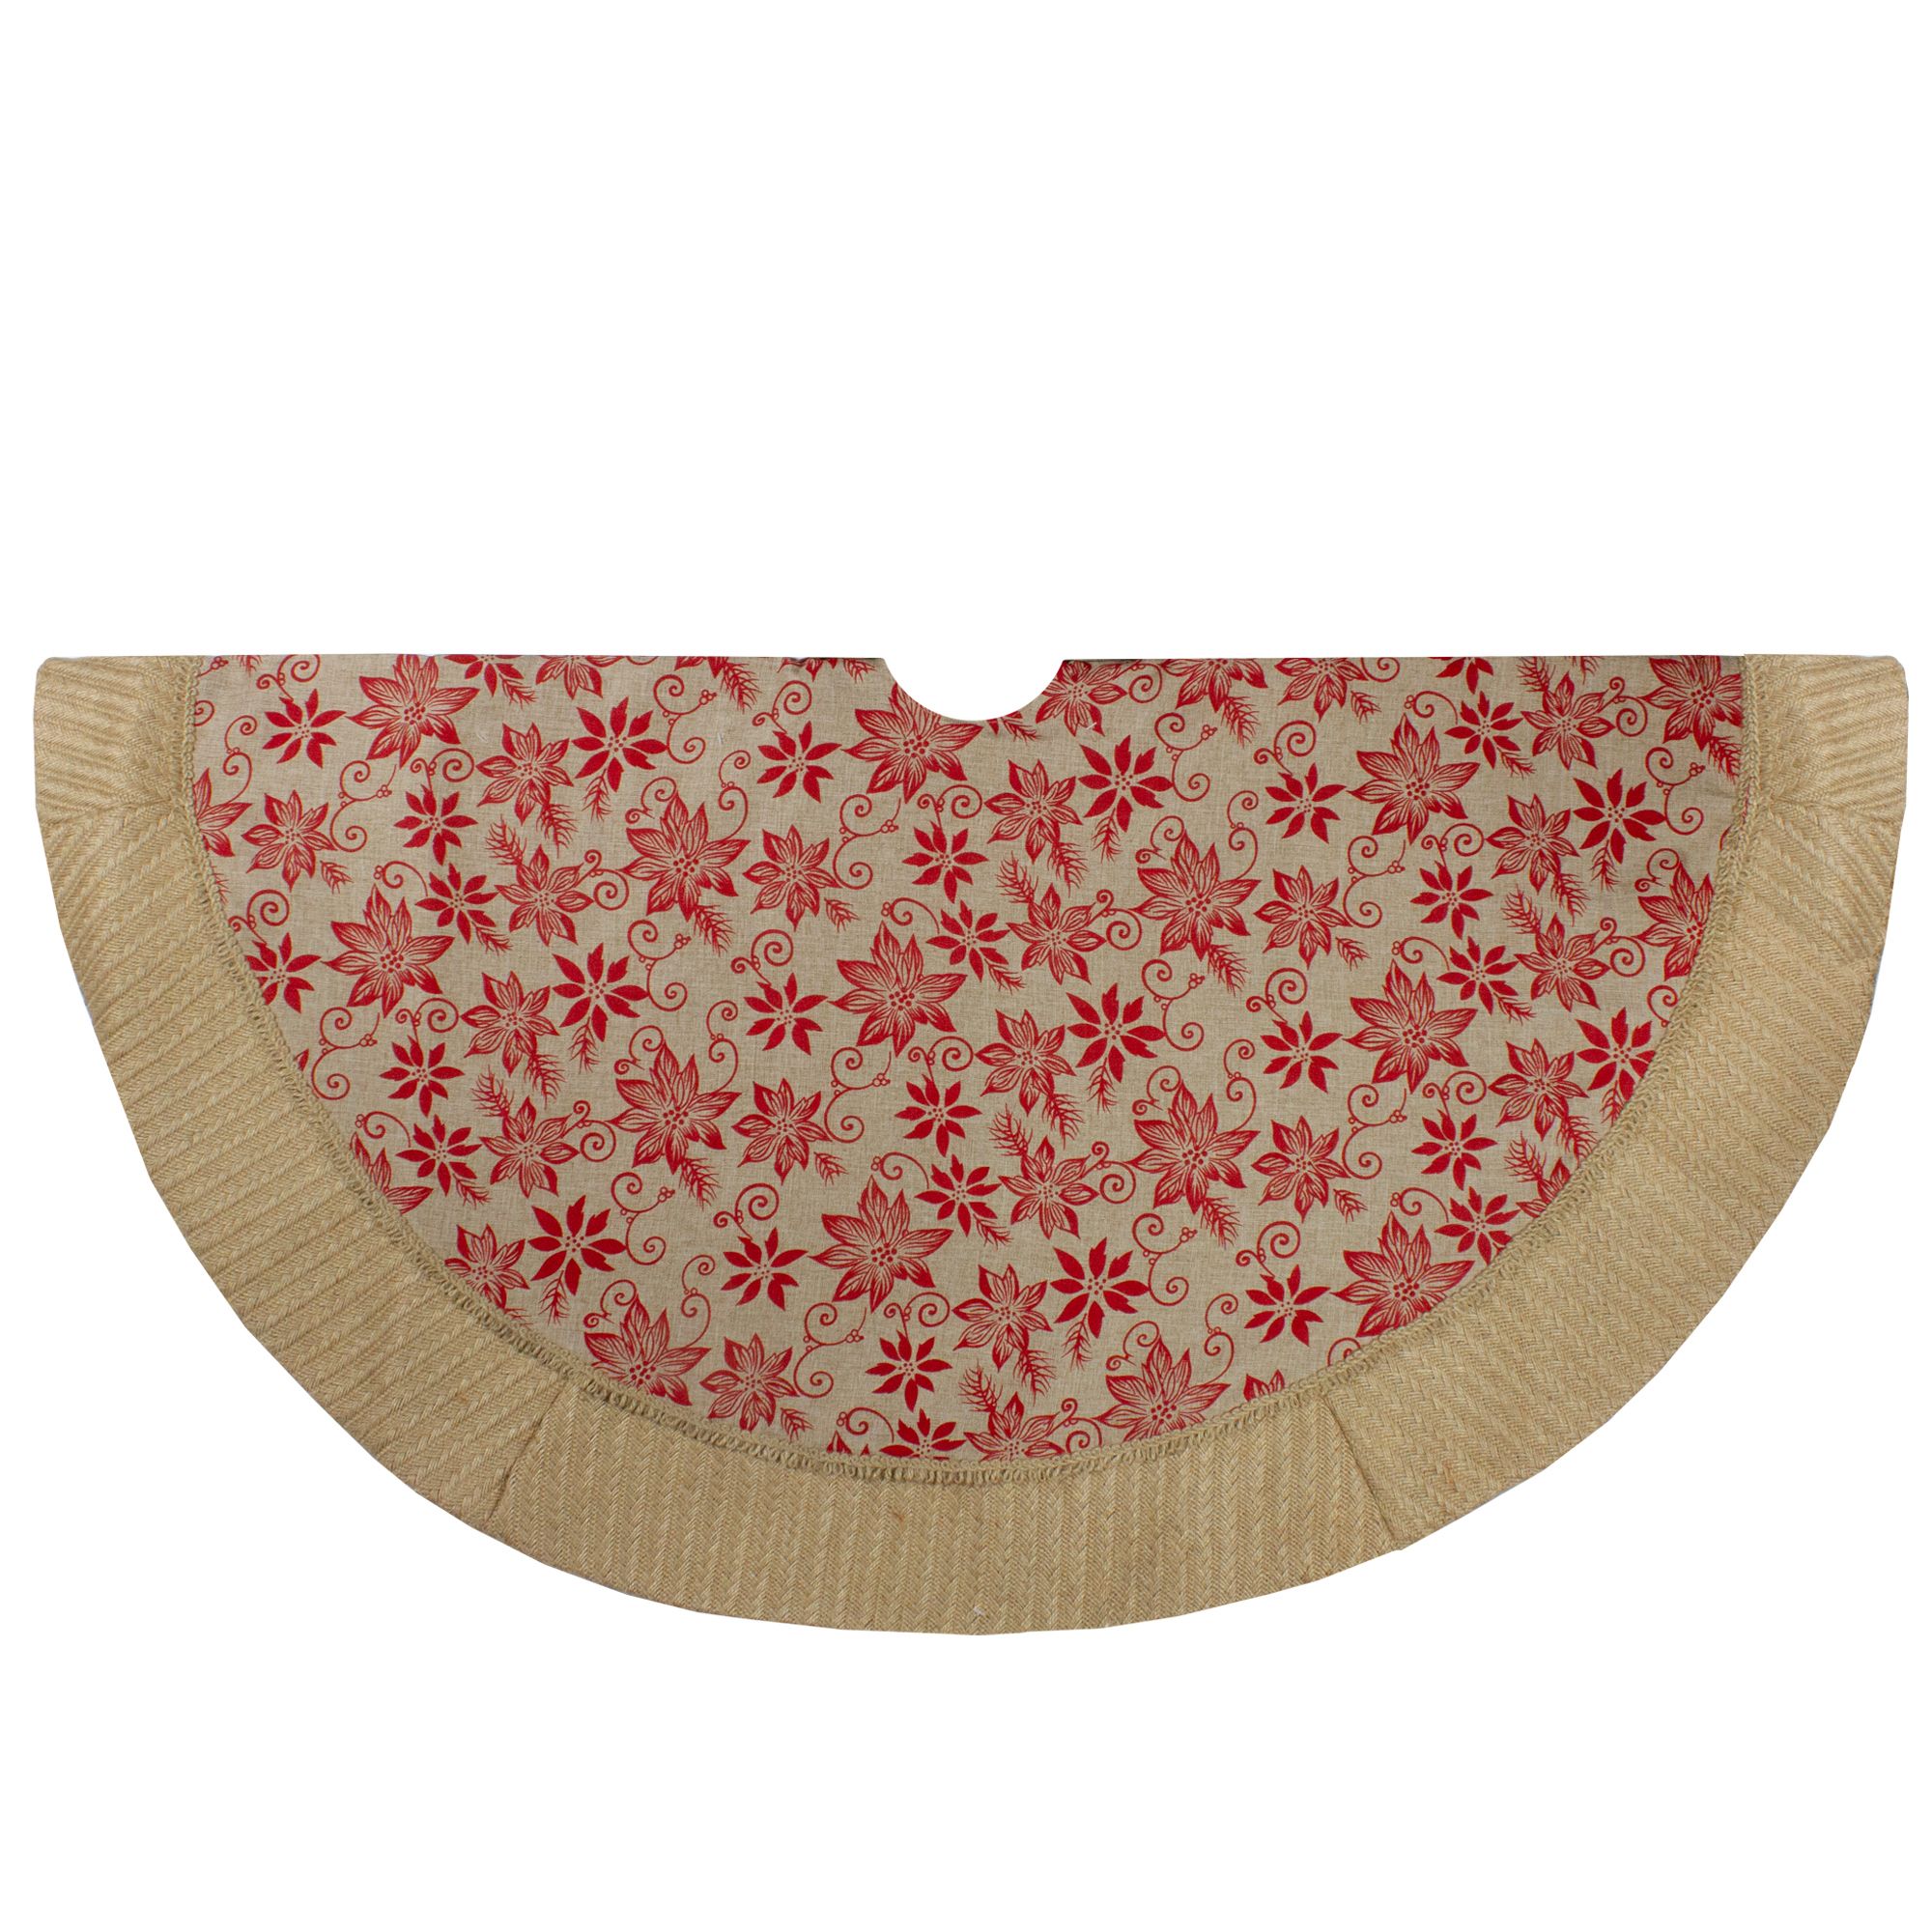 Northlight 48&quot; Rustic Burlap Poinsettia Christmas Tree Skirt - Tan and Red